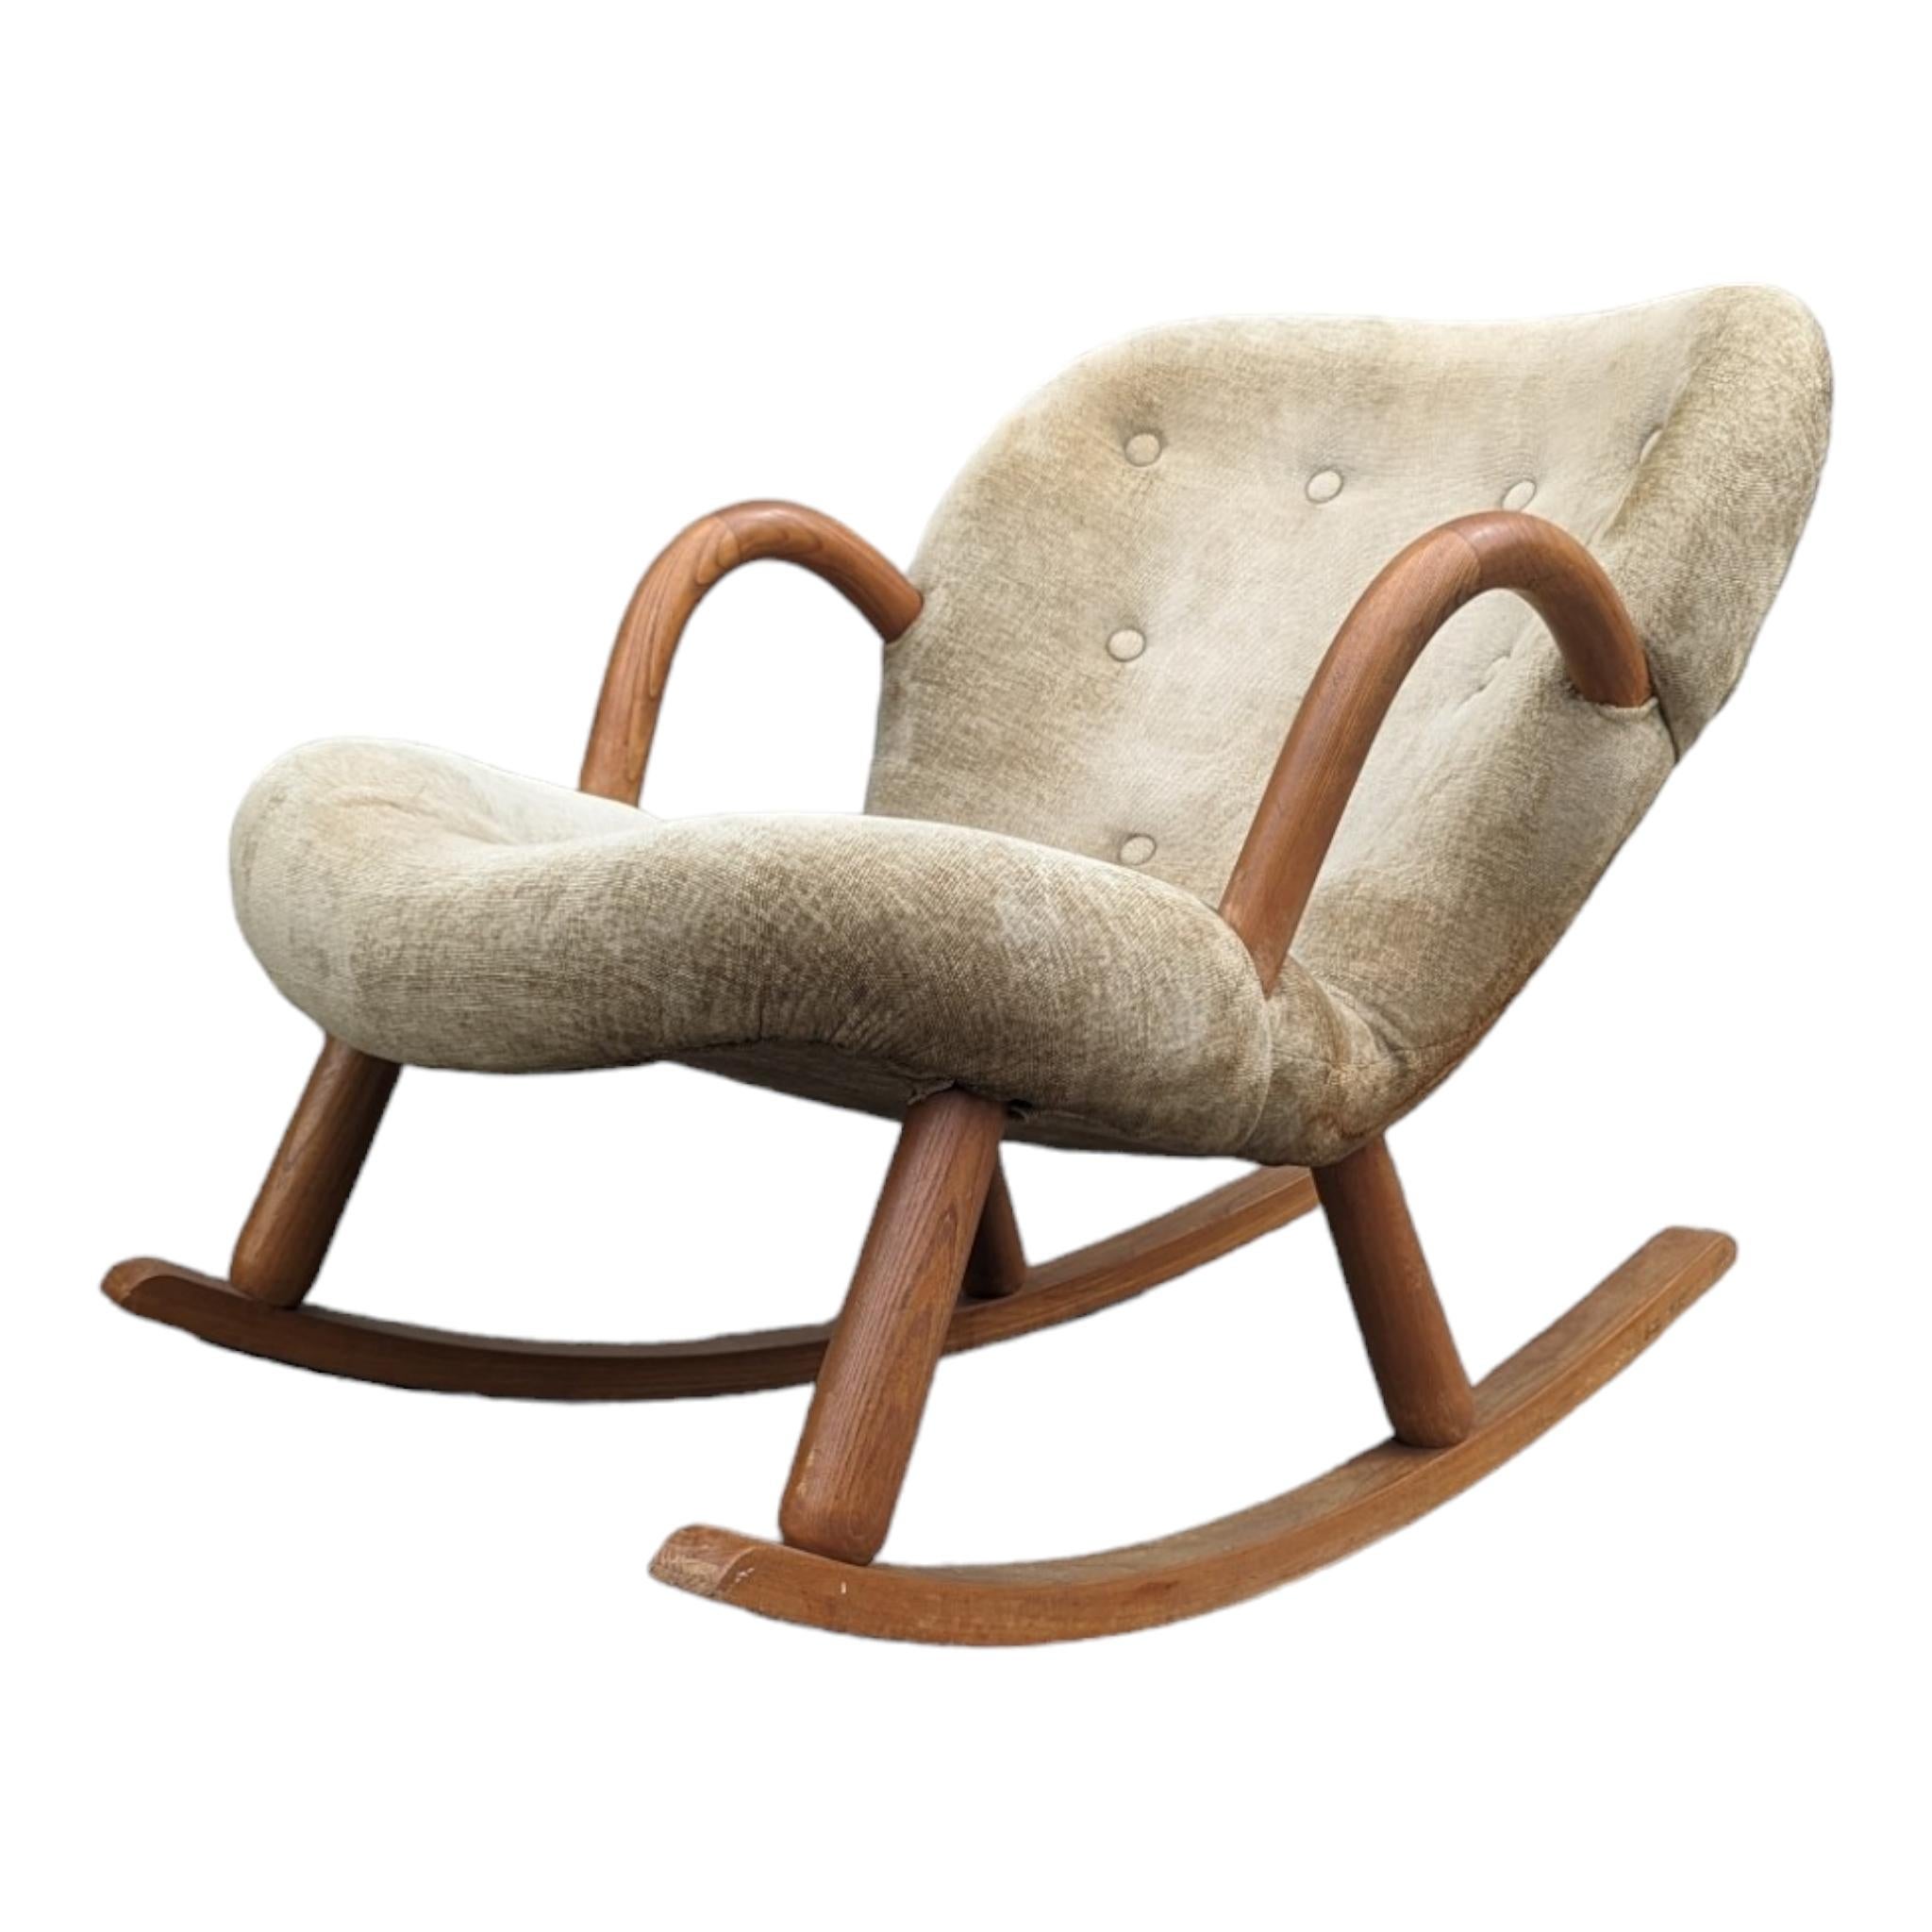 Rare Arnold Madsen Attributed Clam Rocking Chair circa 1960s For Sale 3